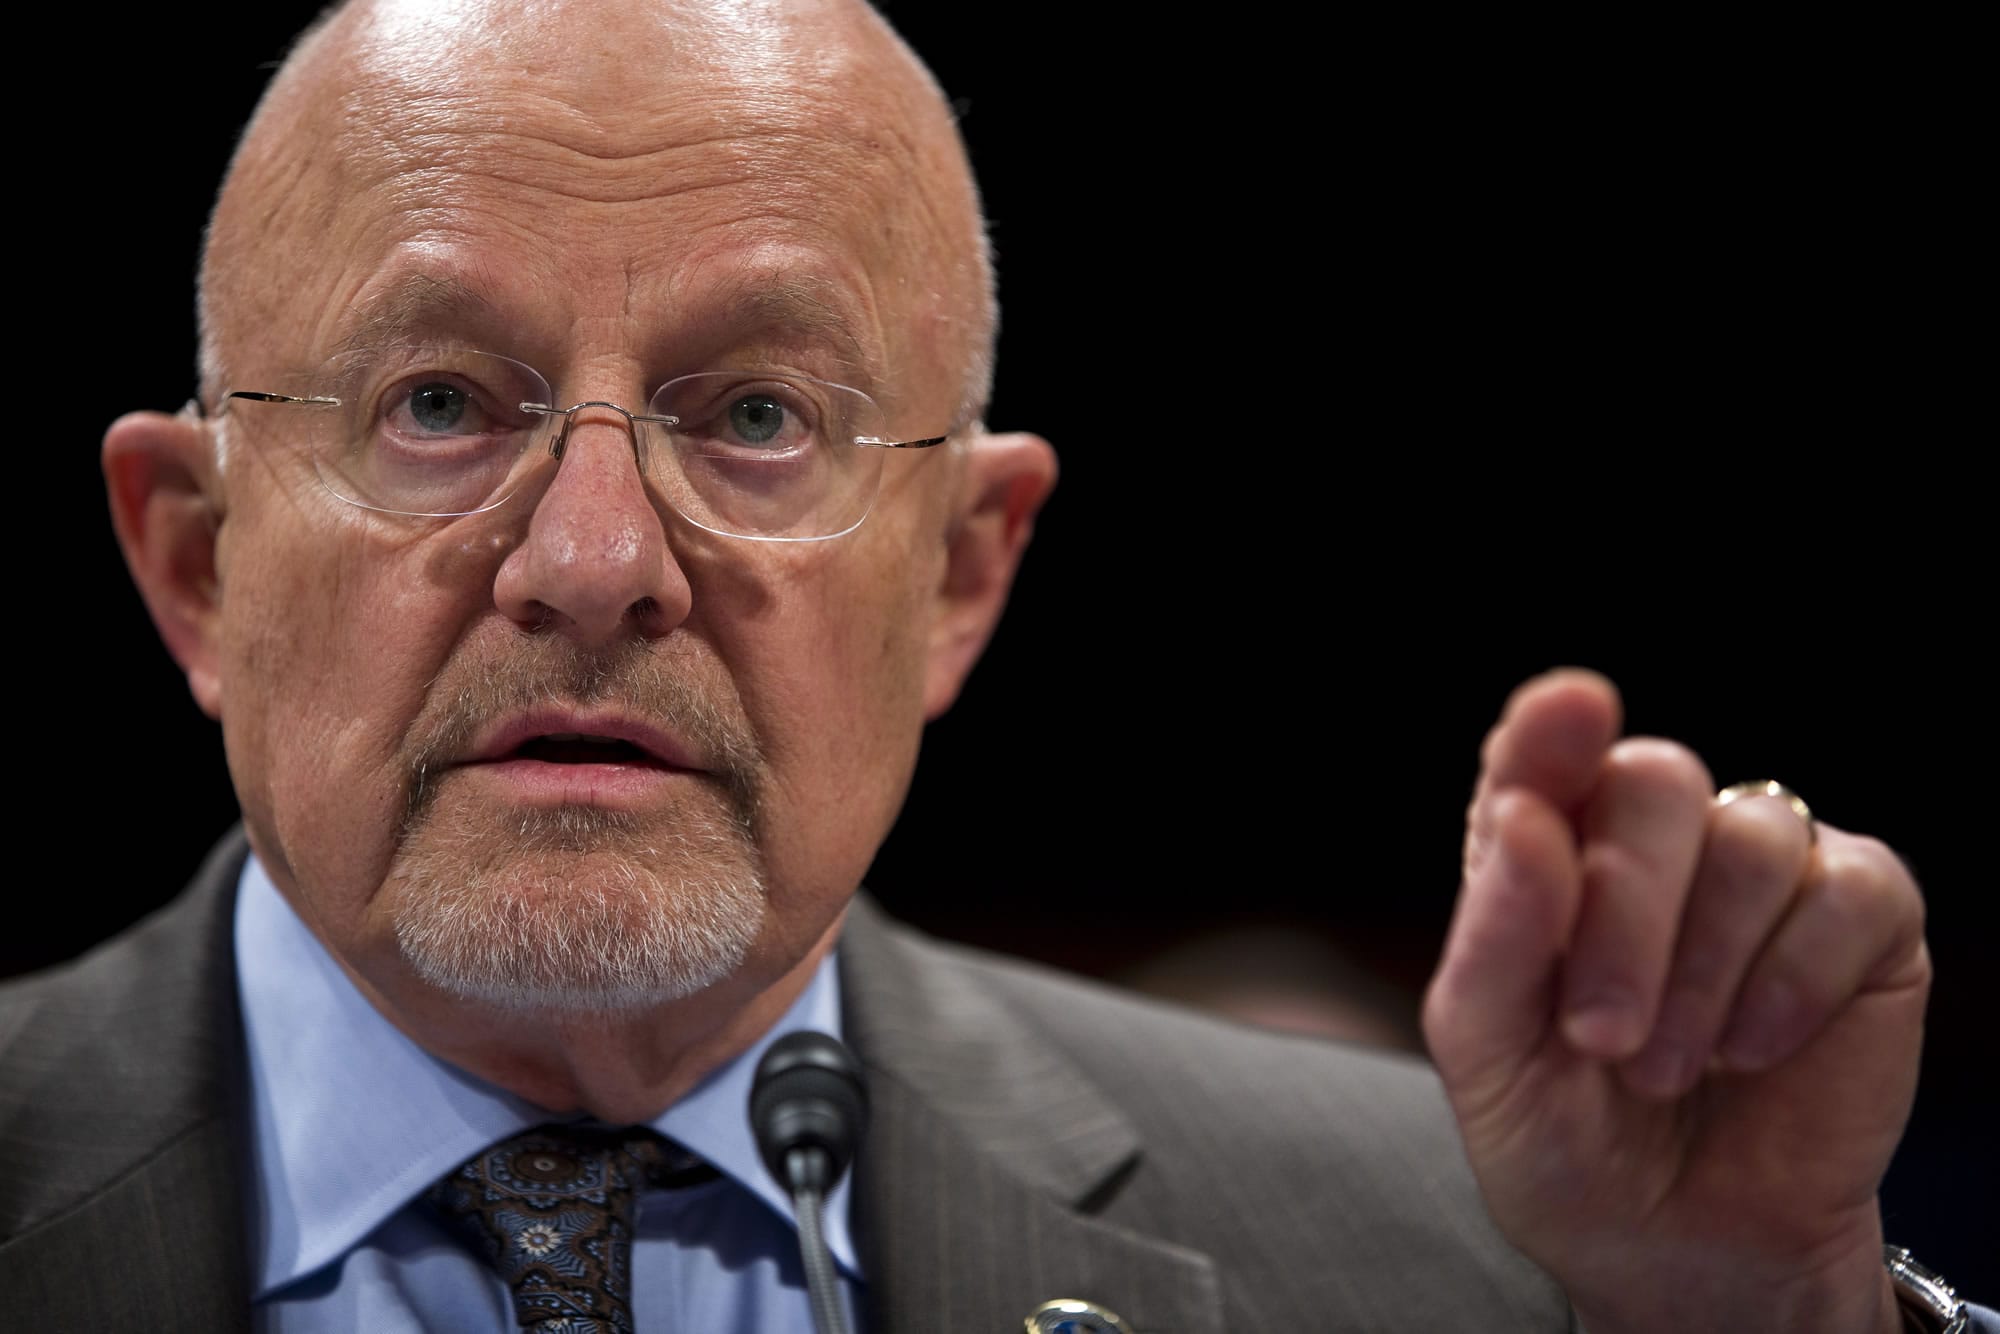 Director of National Intelligence James Clapper testifies on Capitol Hill on Tuesday before the House Intelligence Committee hearing on potential changes to the Foreign Intelligence Surveillance Act.